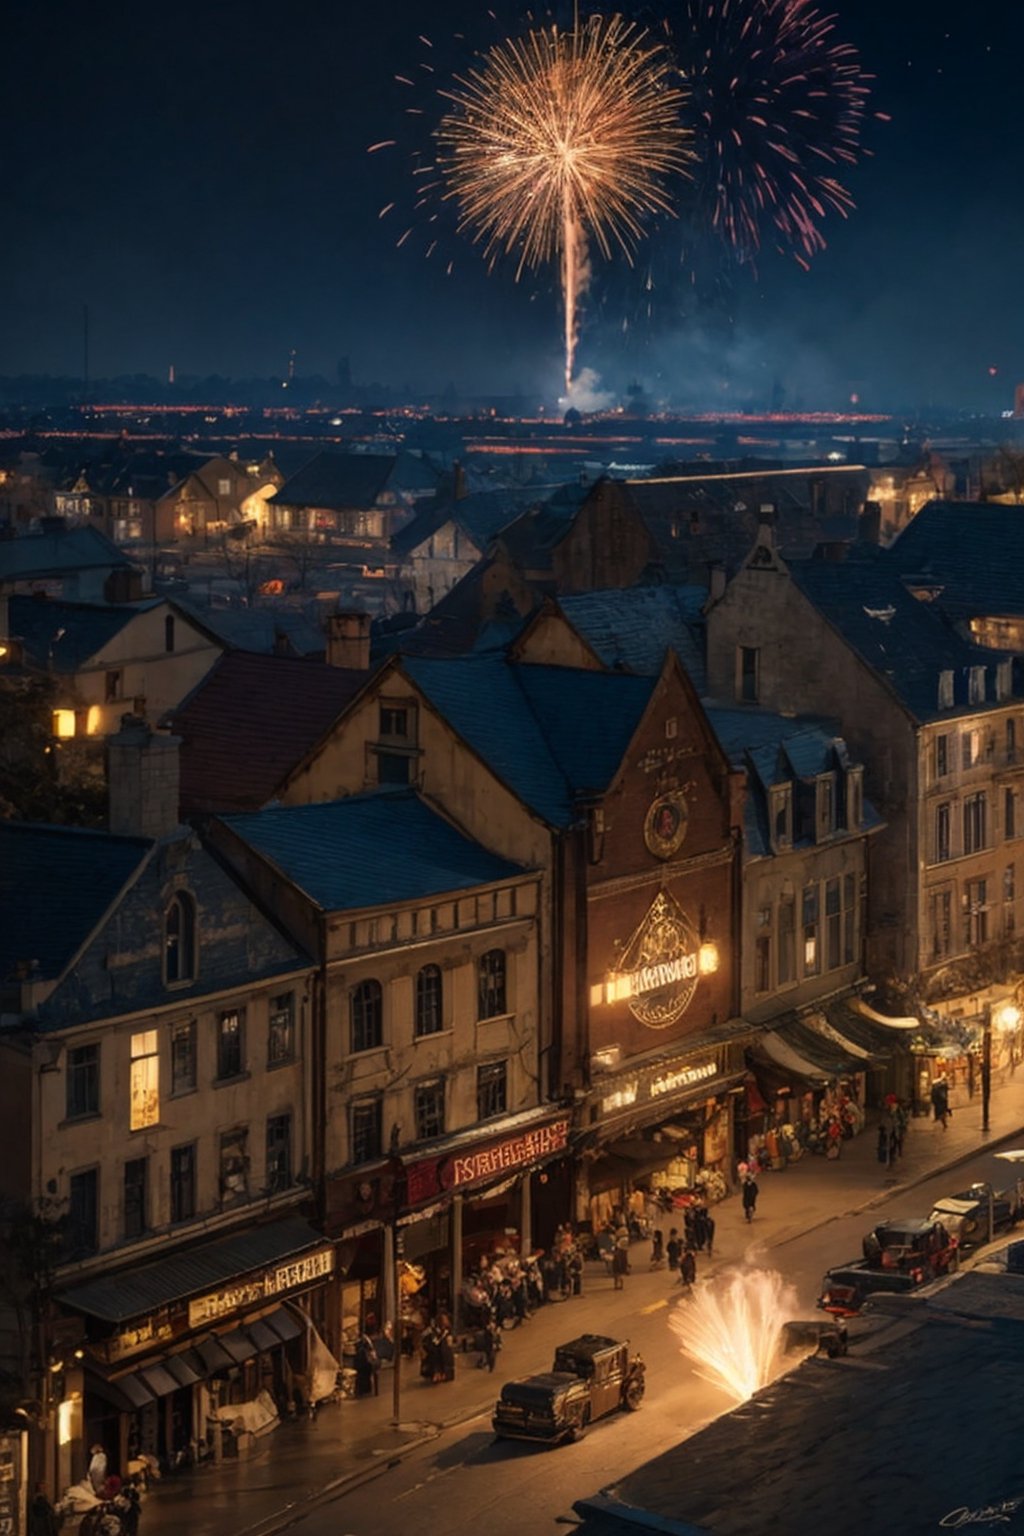 Fire works show in a old time city scape, 1800's scene, new years celebration, steam punk scene,bird 's-eye view